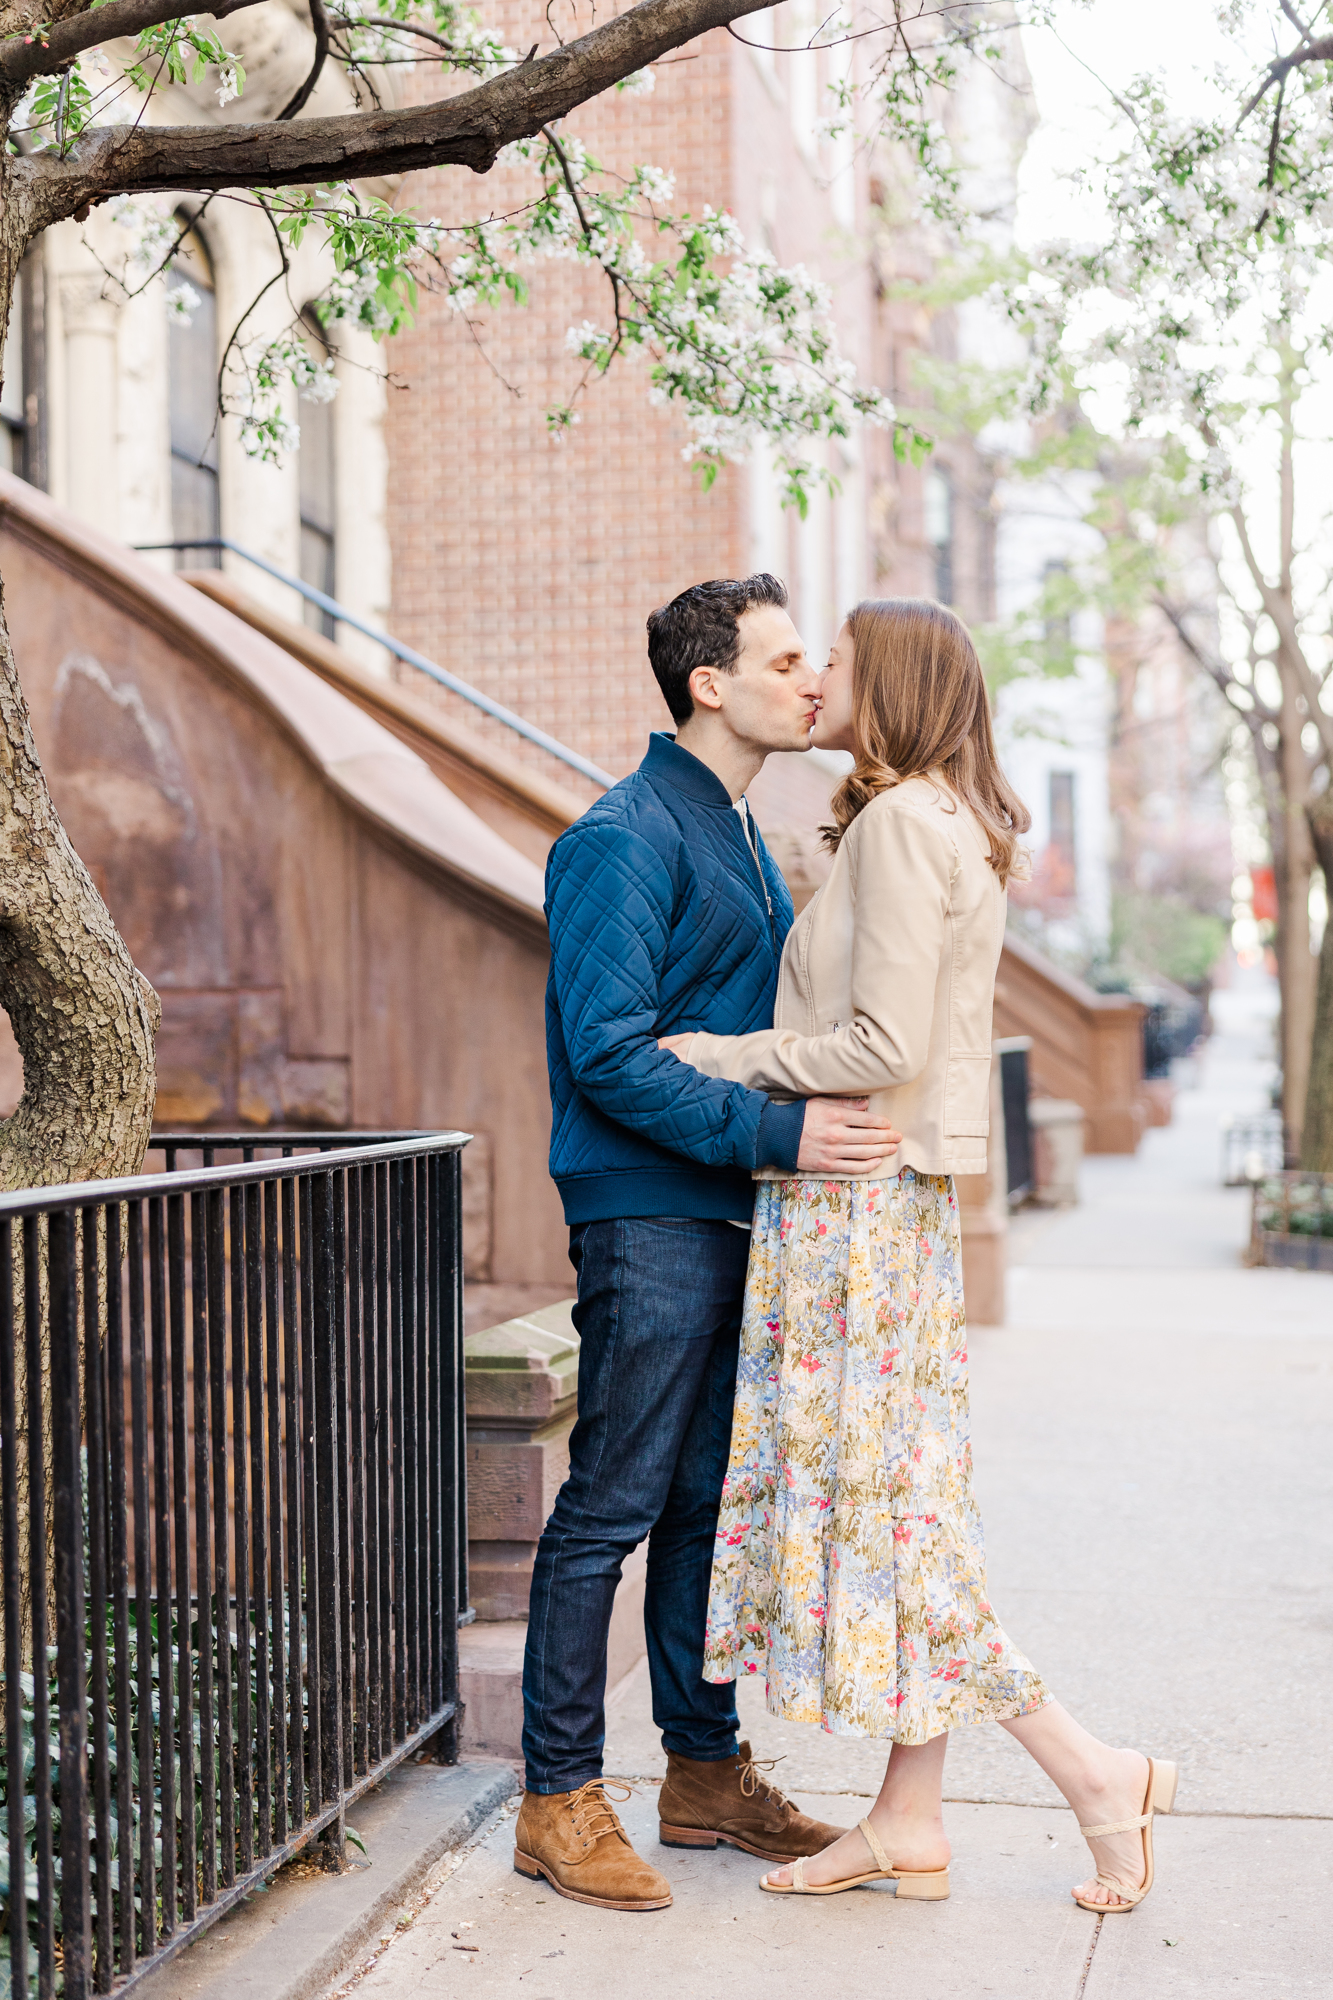 Stunning Upper East Side Engagement Photo Shoot in Spring